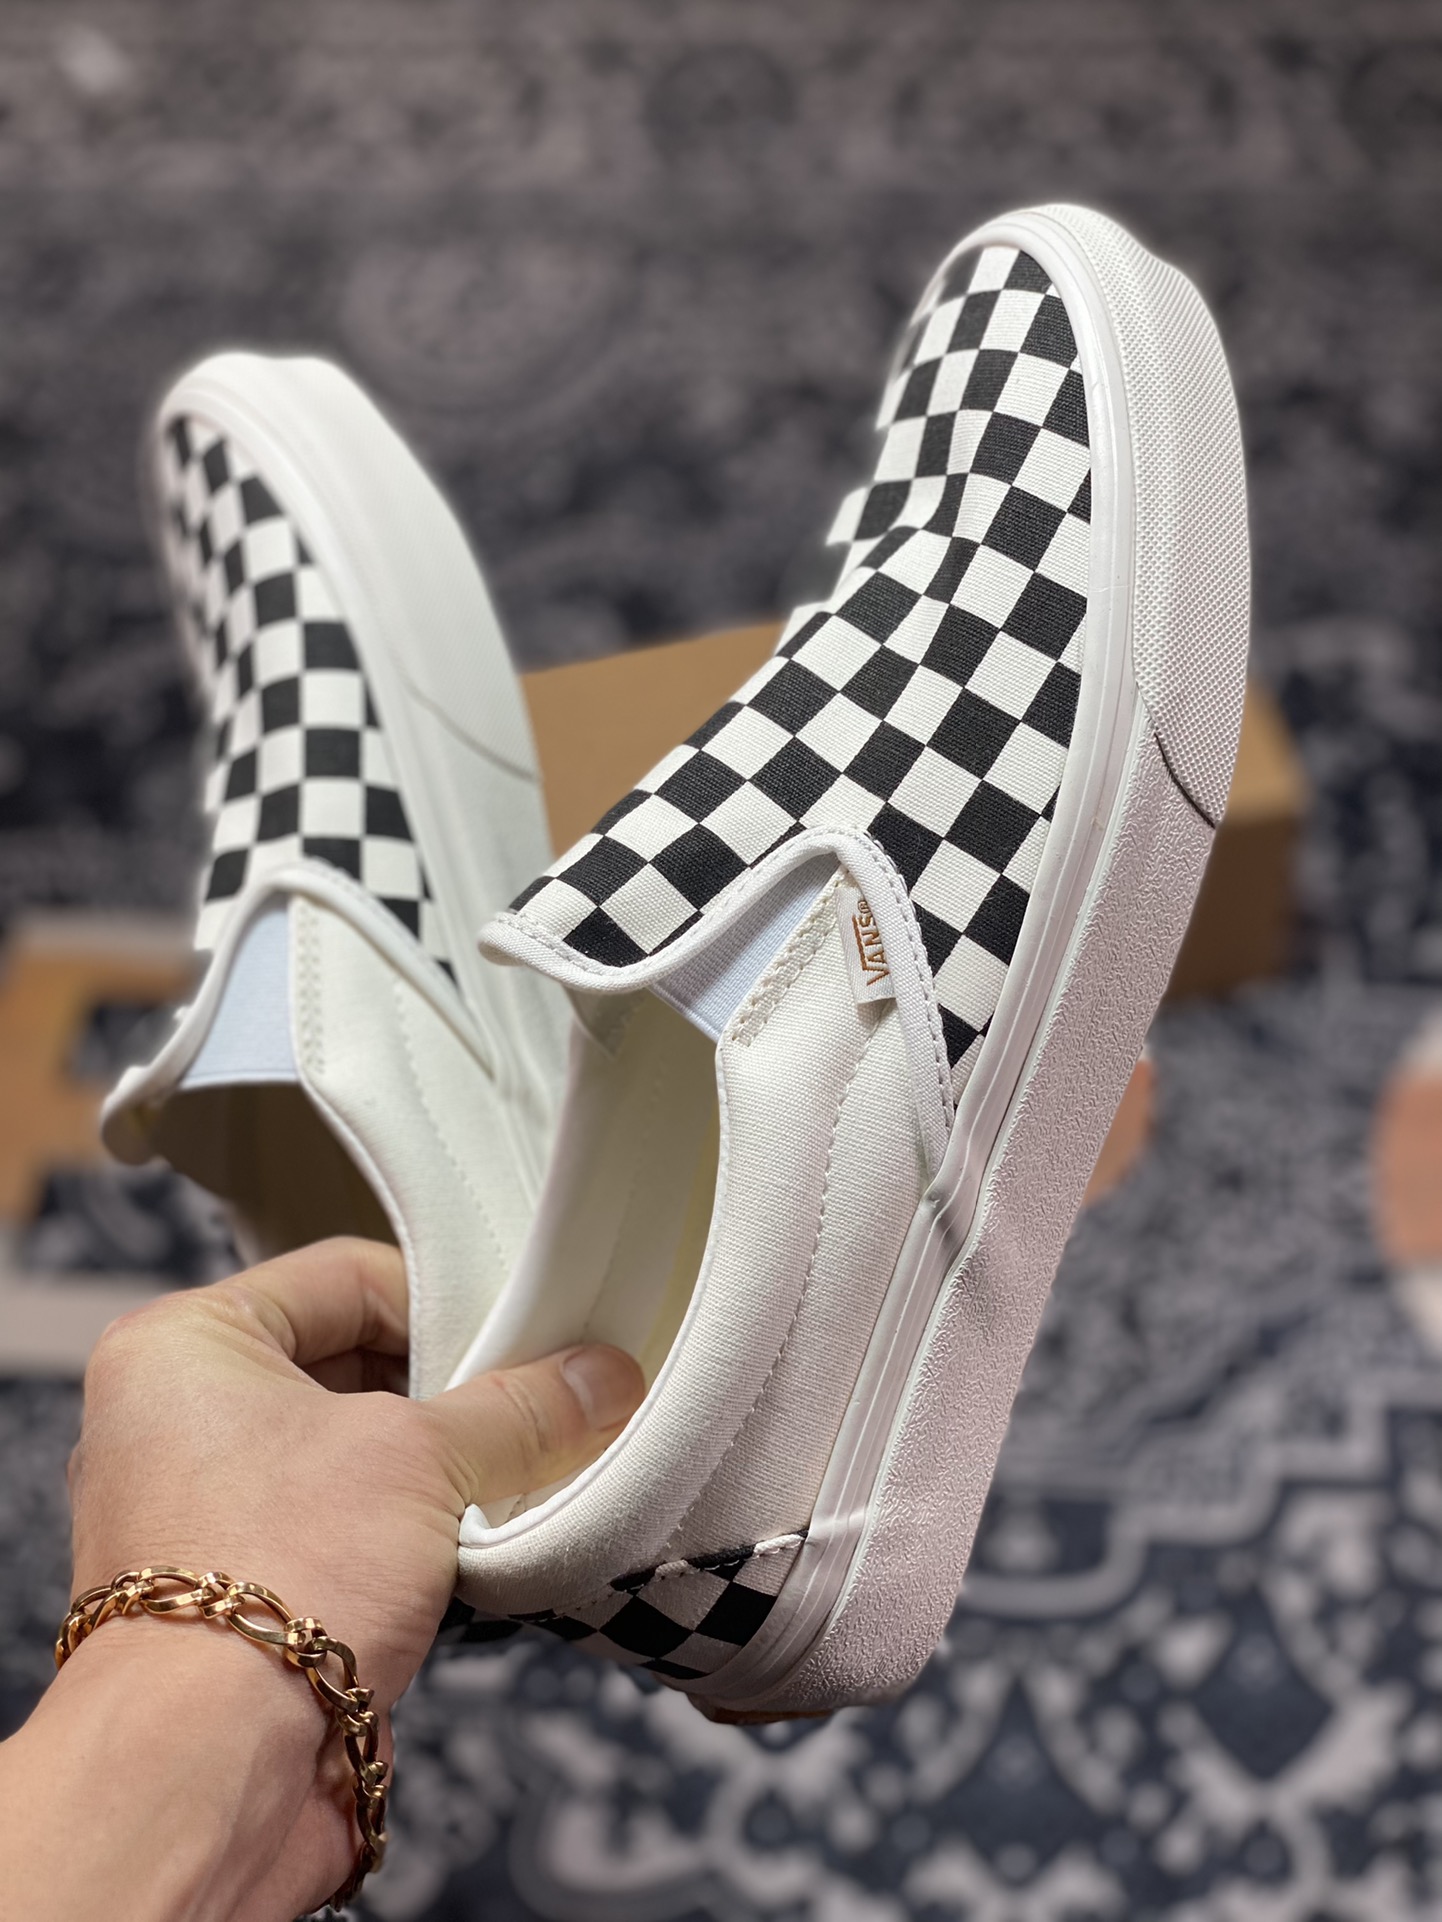 Vans Slip-on VR3 black and white checkerboard Vans official comfortable slip-on casual canvas shoes